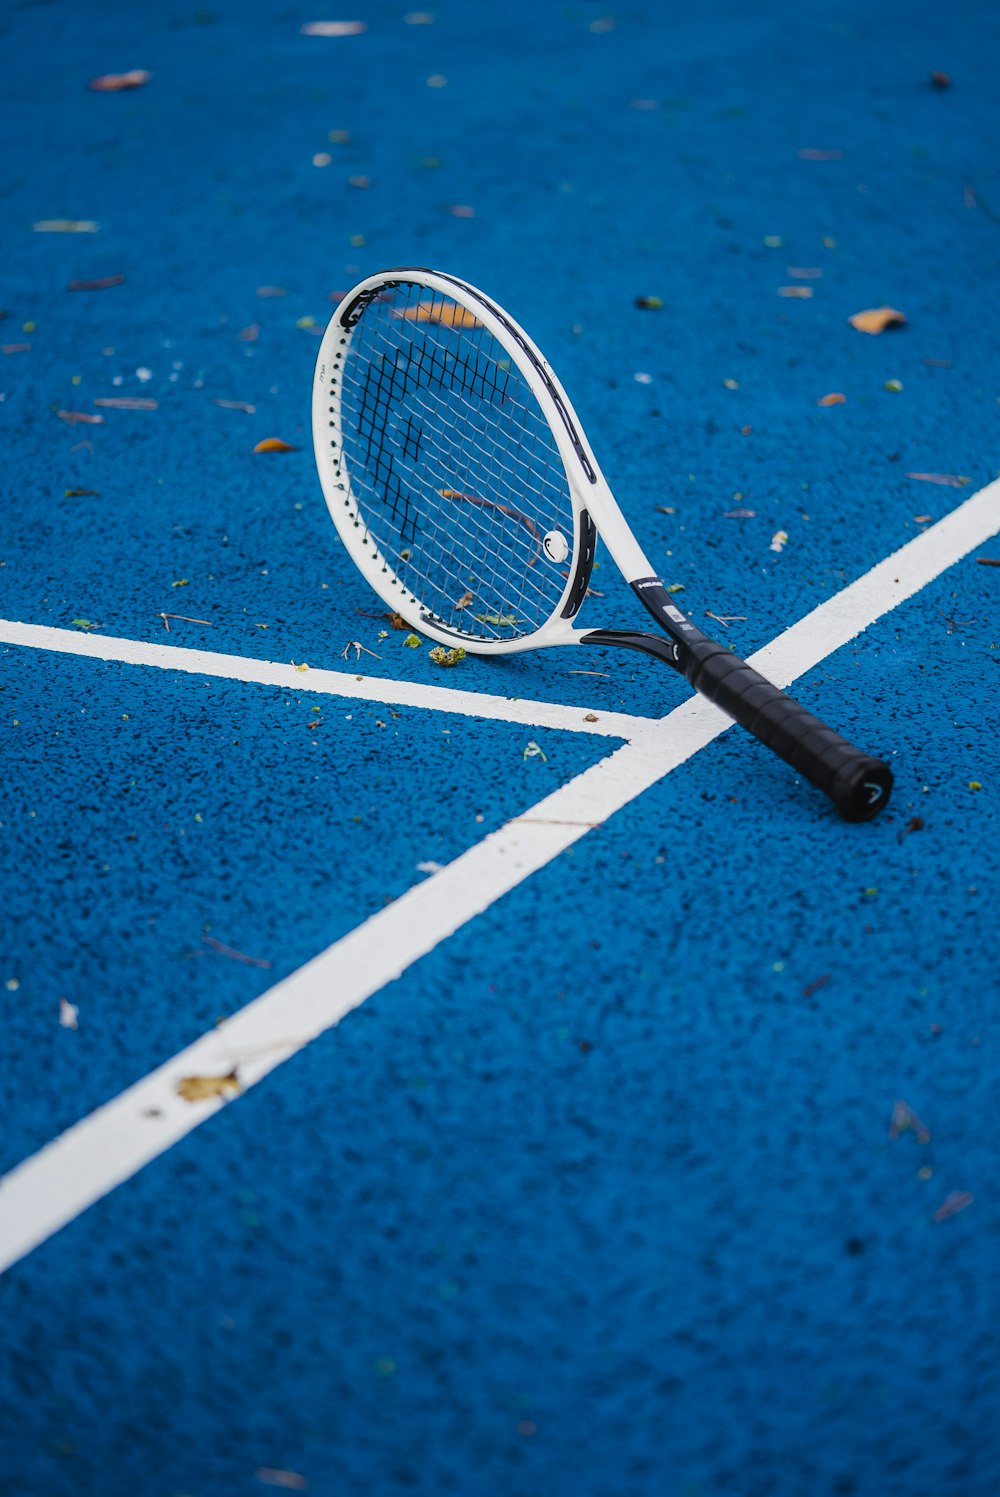 a tennis racket laying on a blue tennis court